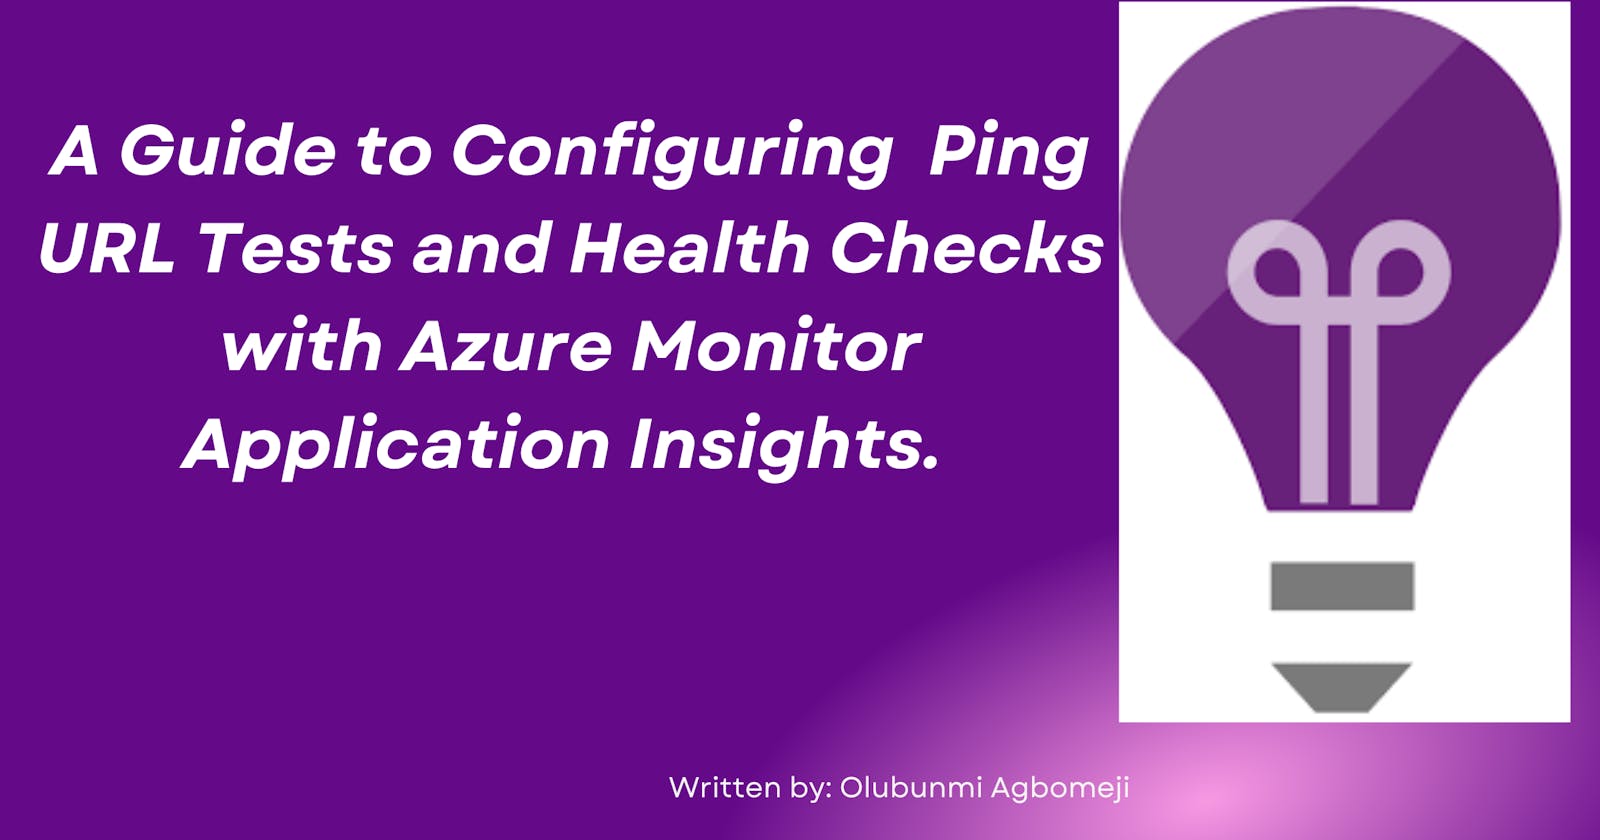 A Guide to Configuring  Ping URL Tests and Health Checks with Azure Monitor Application Insights.